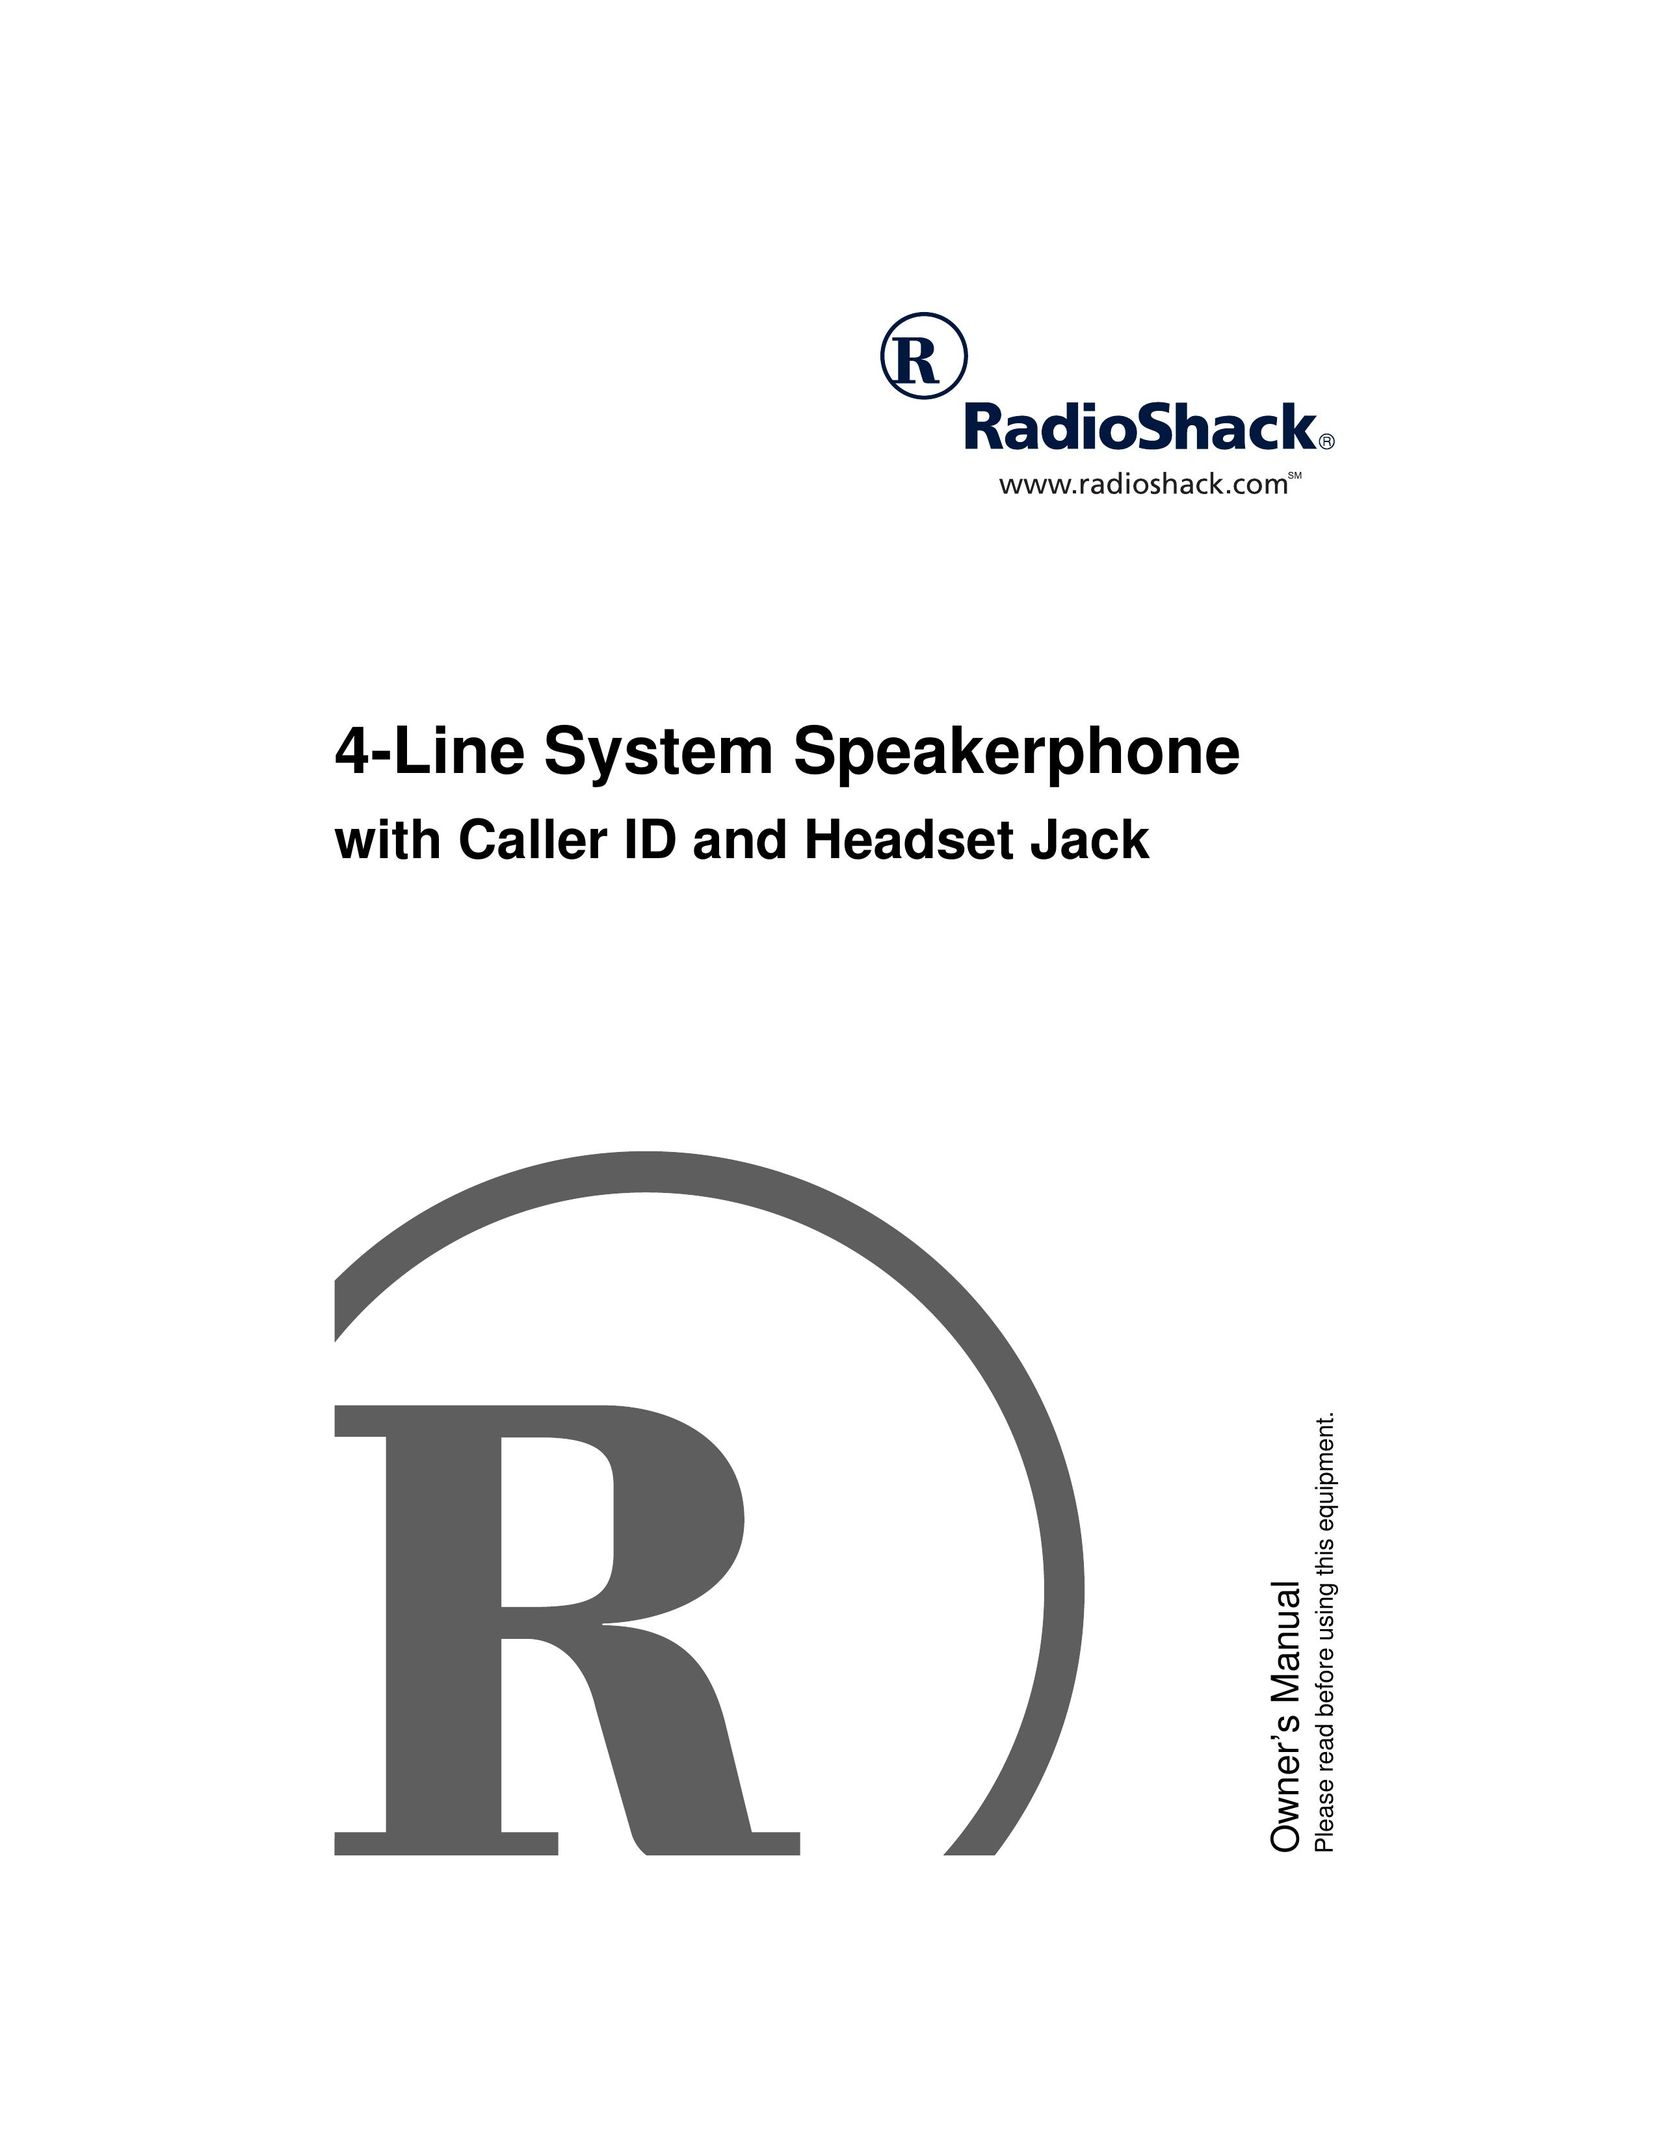 Radio Shack 4-Line System Speakerphone with Caller ID and Headset Jack Telephone User Manual